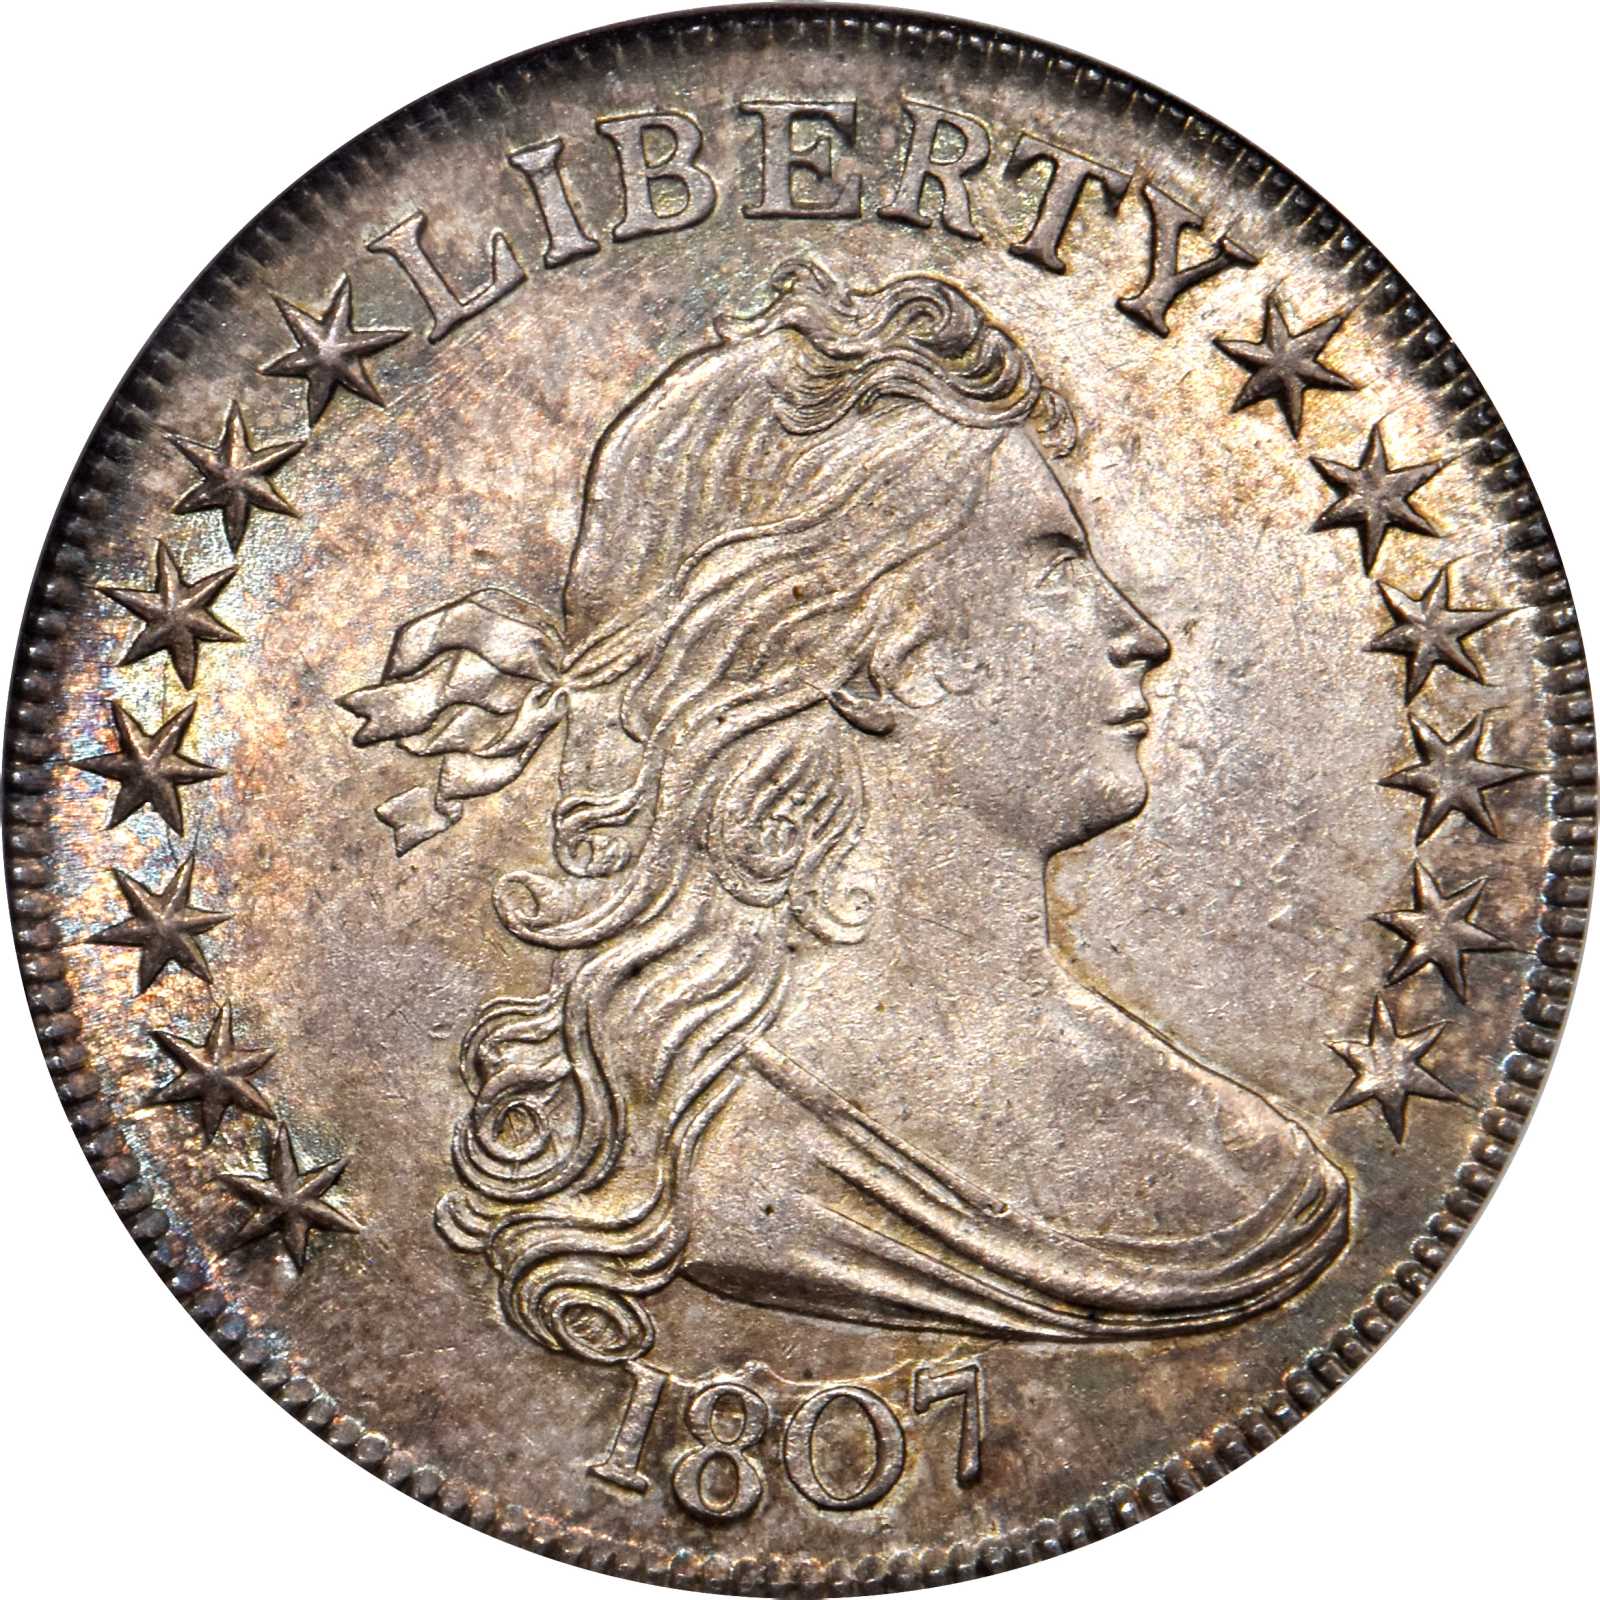 1807 Draped Bust Half Dollar Coin Pricing Guide | The Greysheet